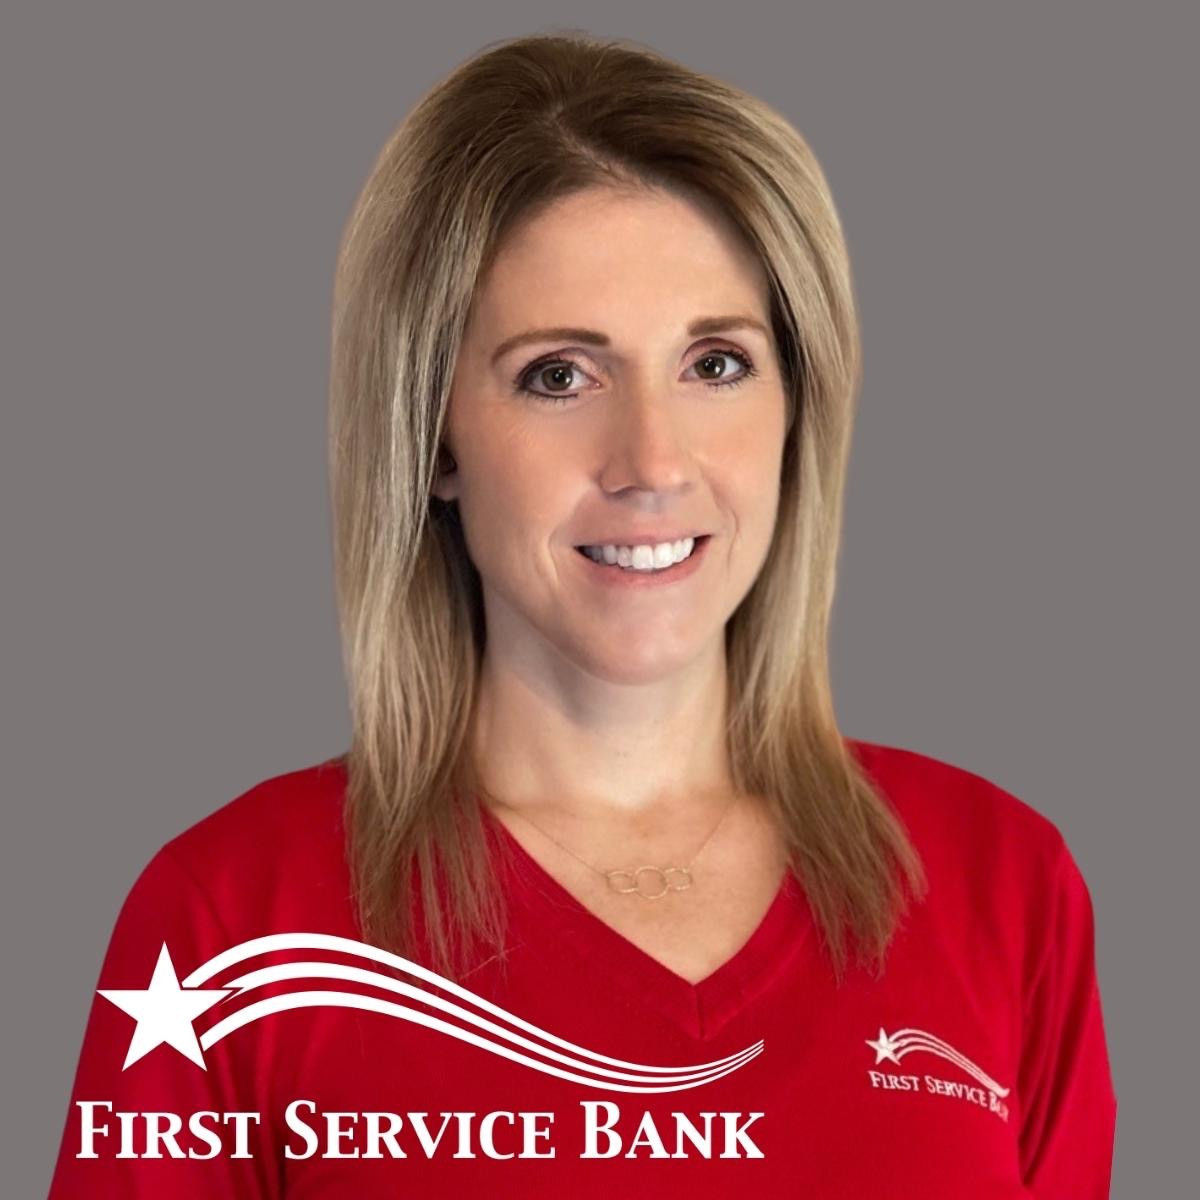 First Service Bank Welcomes Brandy S. Harris as Audit & Compliance Officer